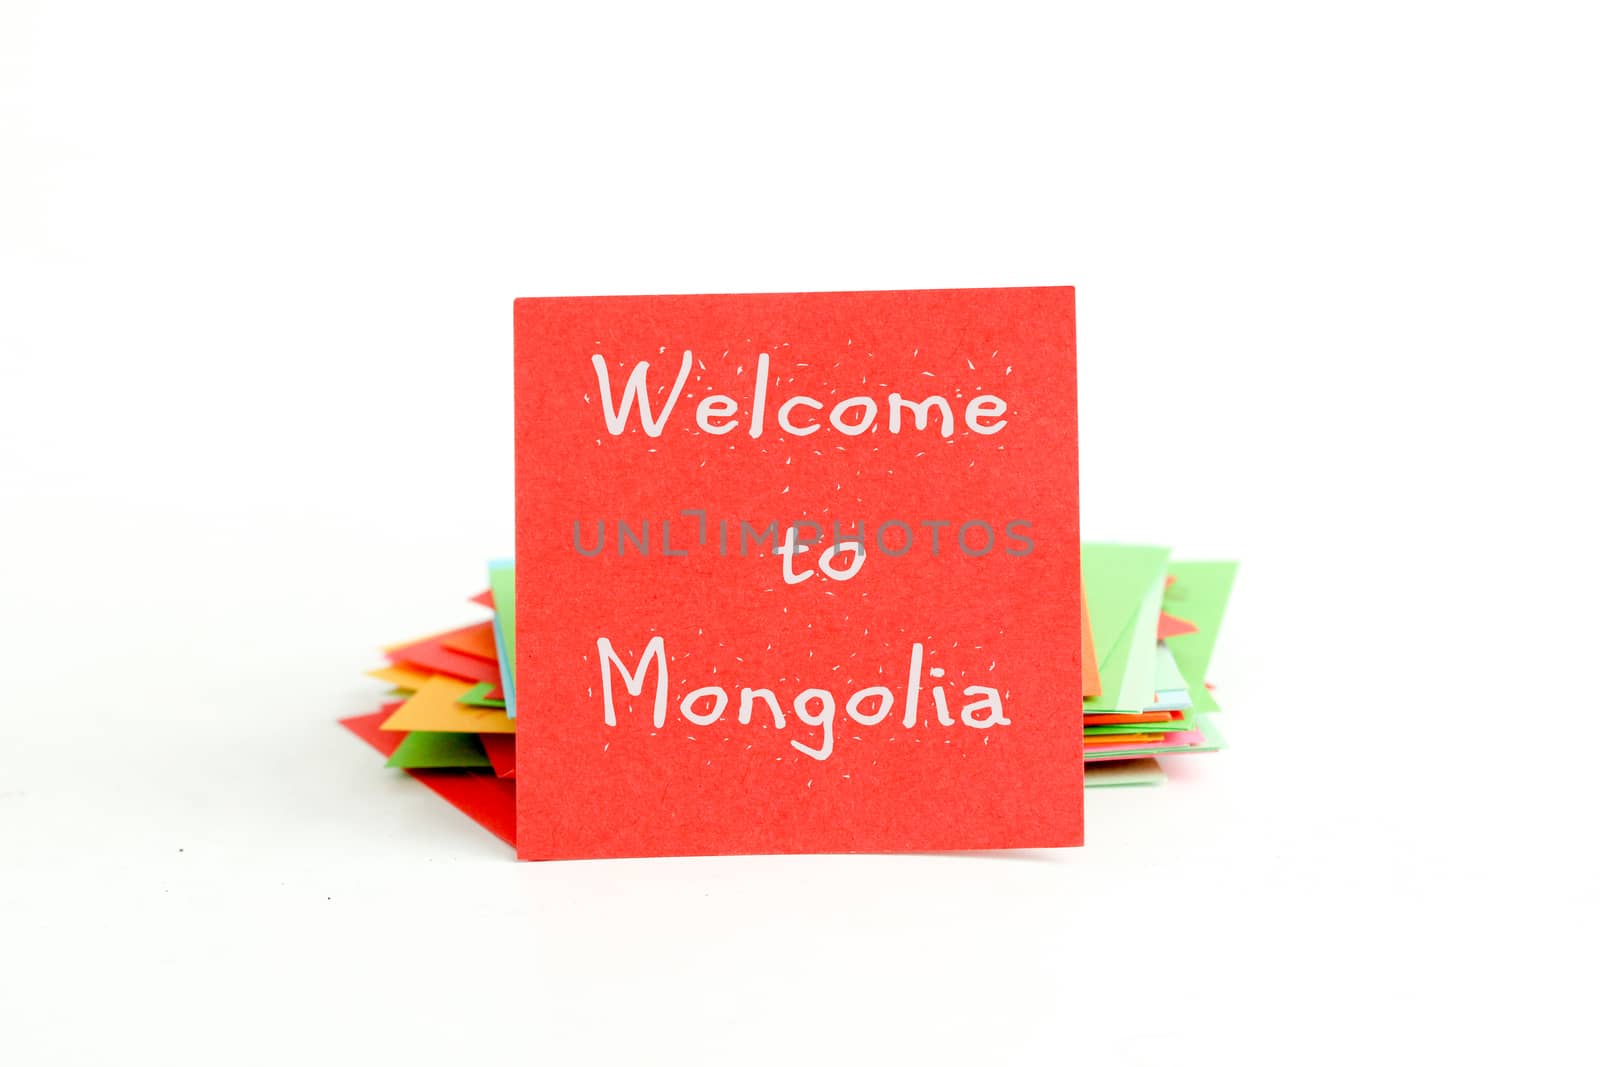 picture of a red note paper with text welcome to mongolia